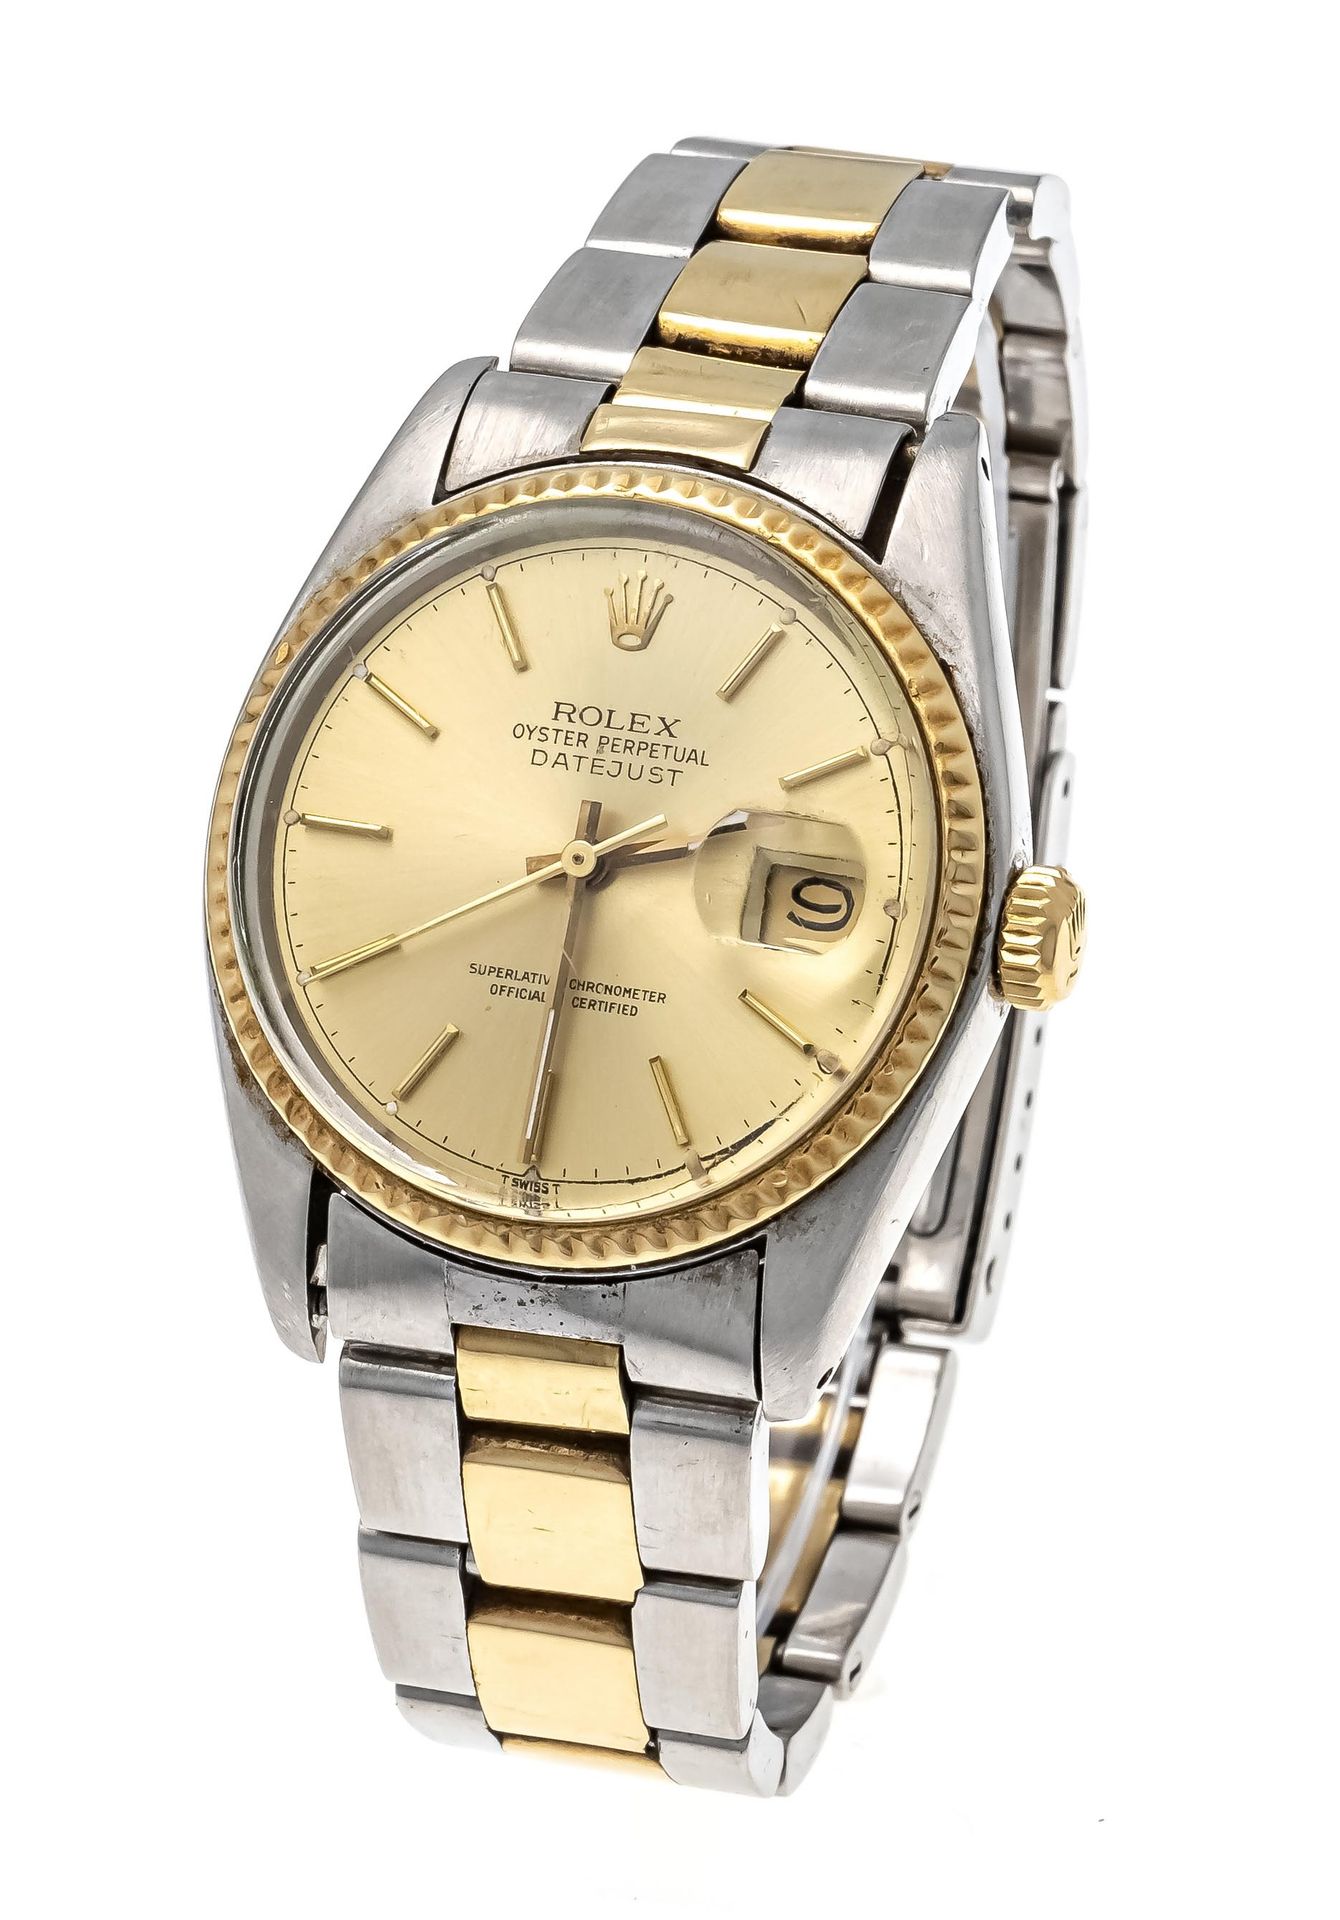 Null Rolex men's watch, Ref. 16013, Oyster Perpetual Datejust, chronometer, stee&hellip;